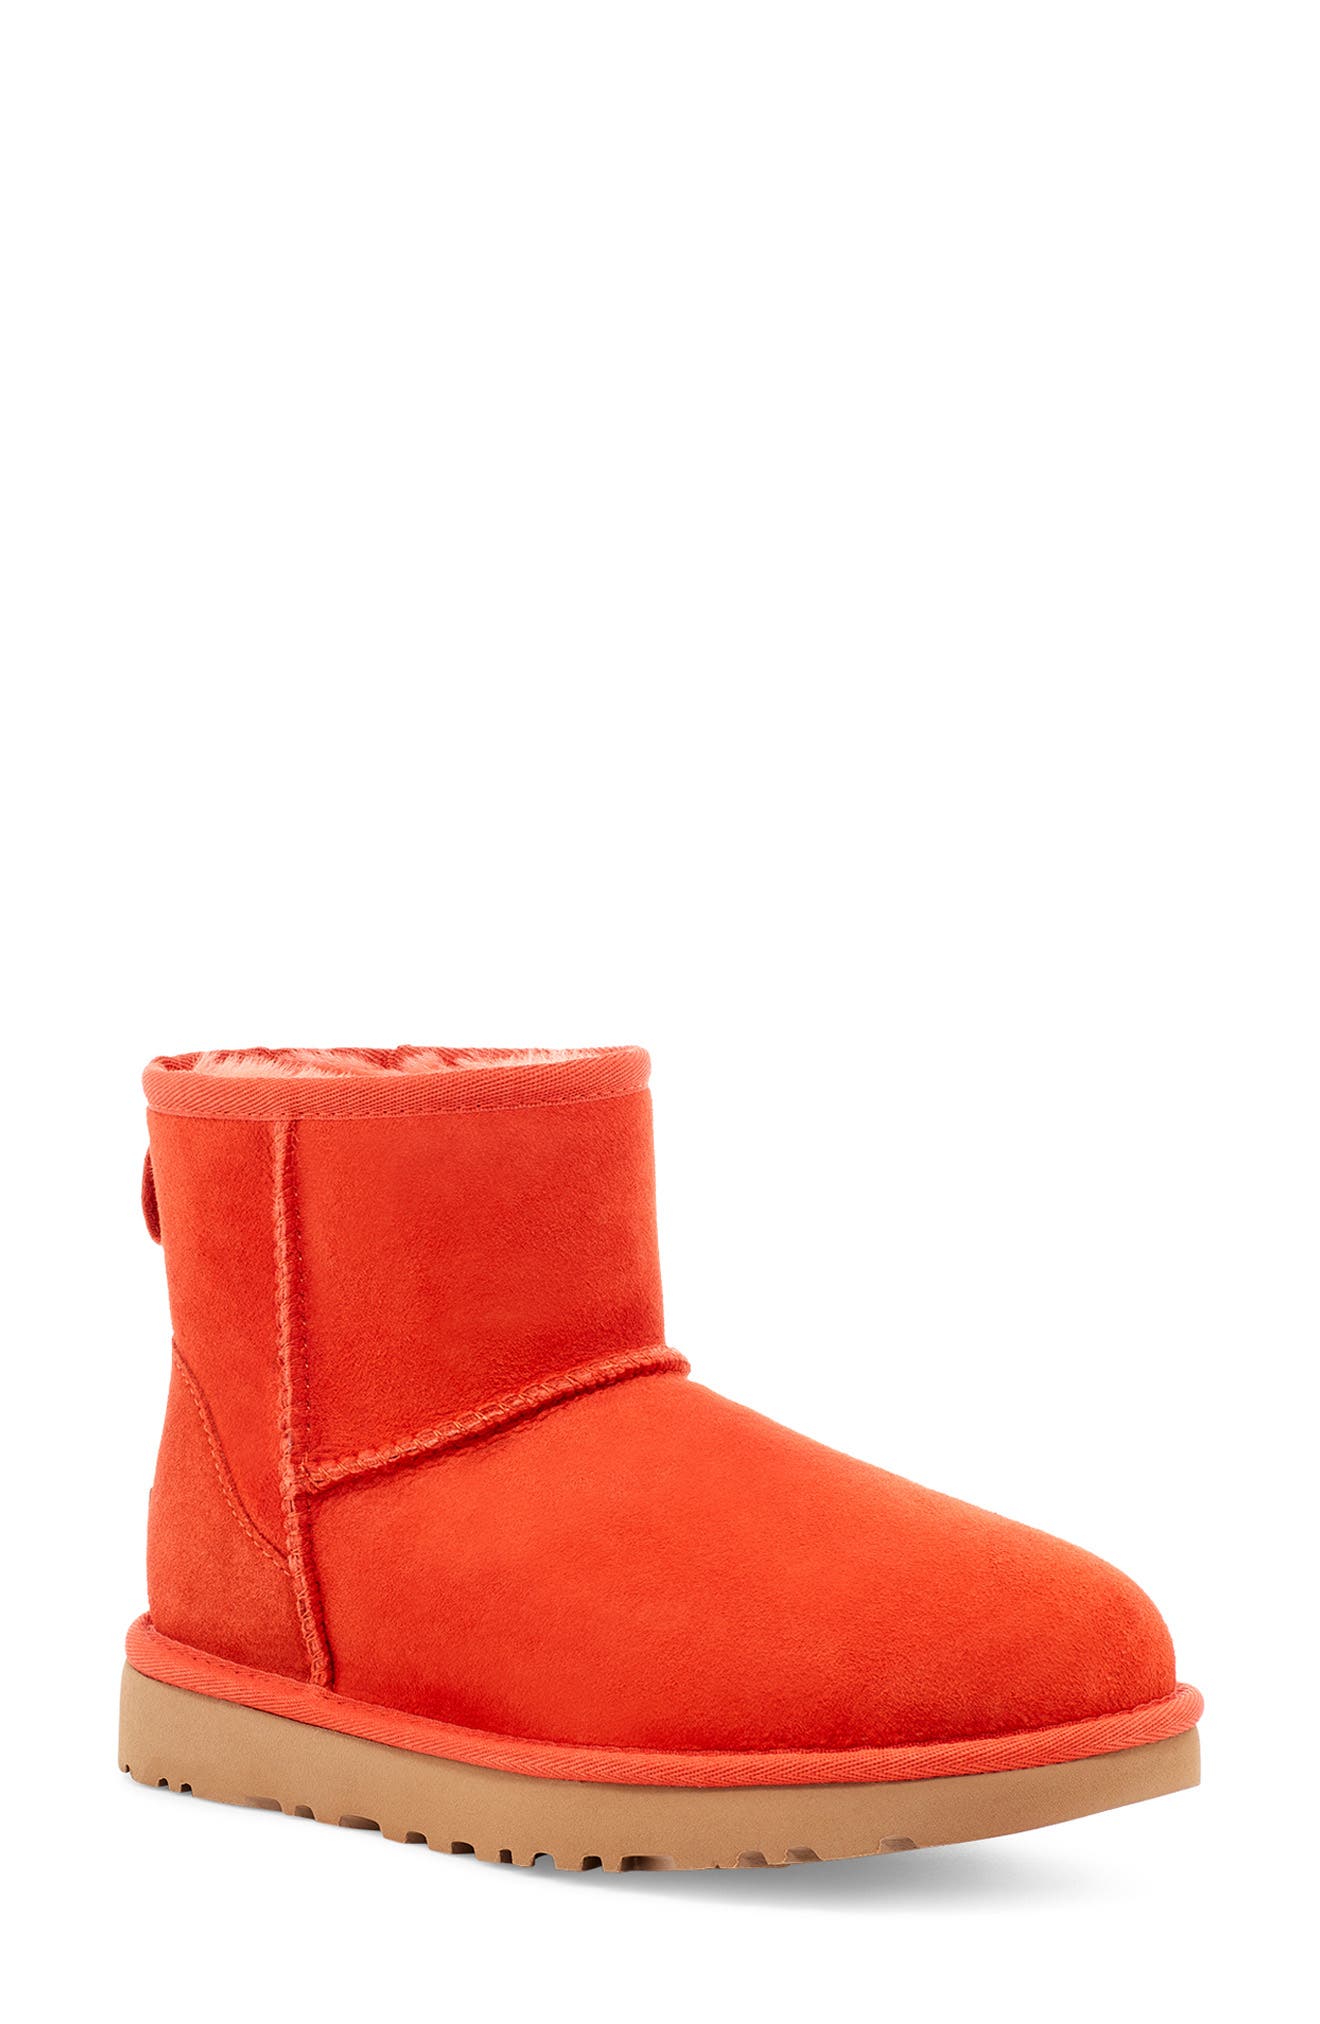 womens red snow boots